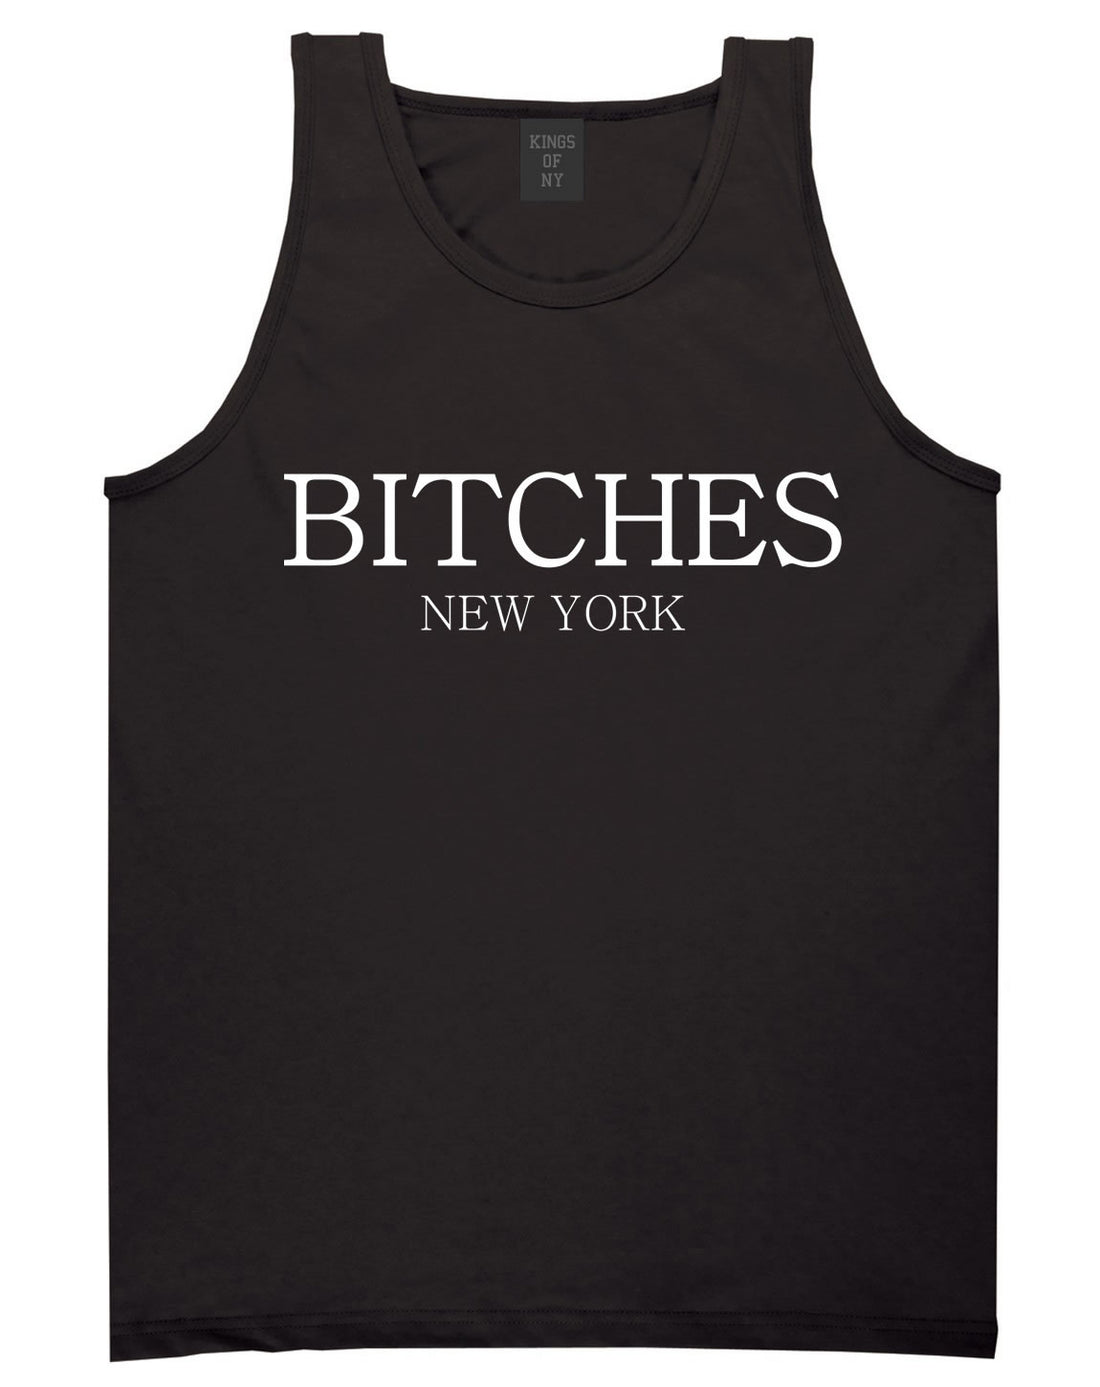  Bitches New York Tank Top in Black by Kings Of NY